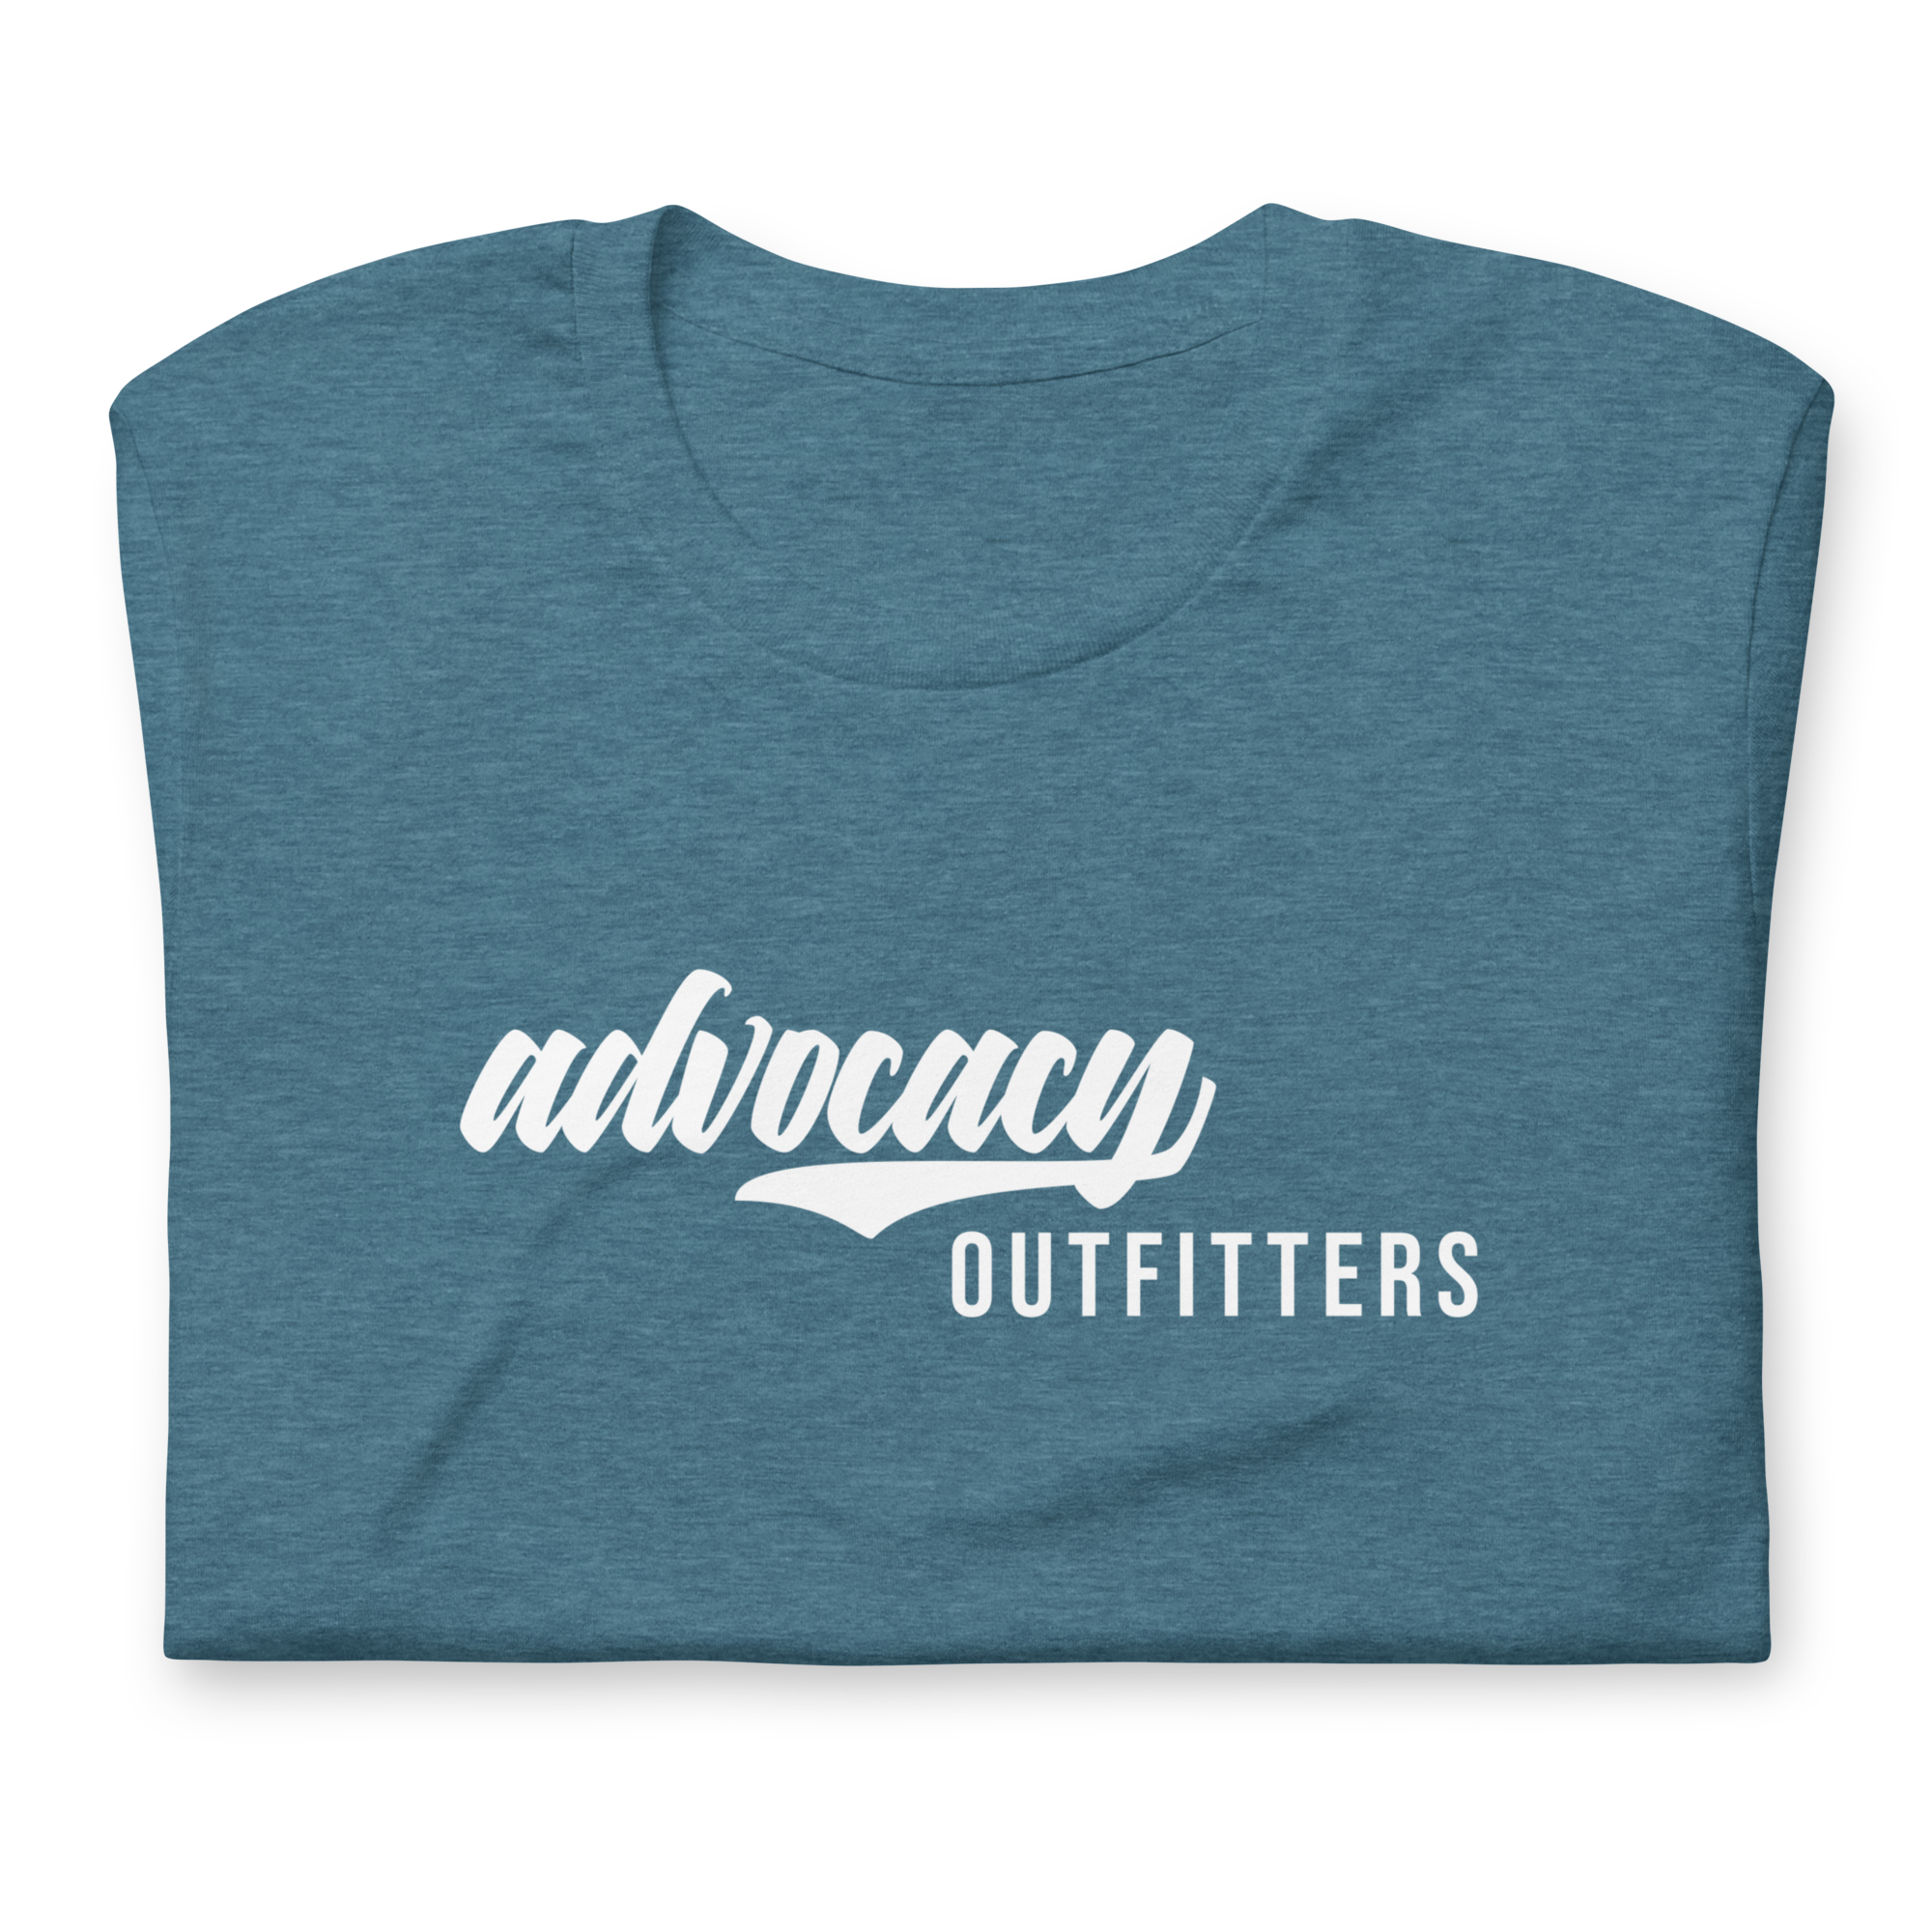 Advocacy Outfitters Vintage T-shirt